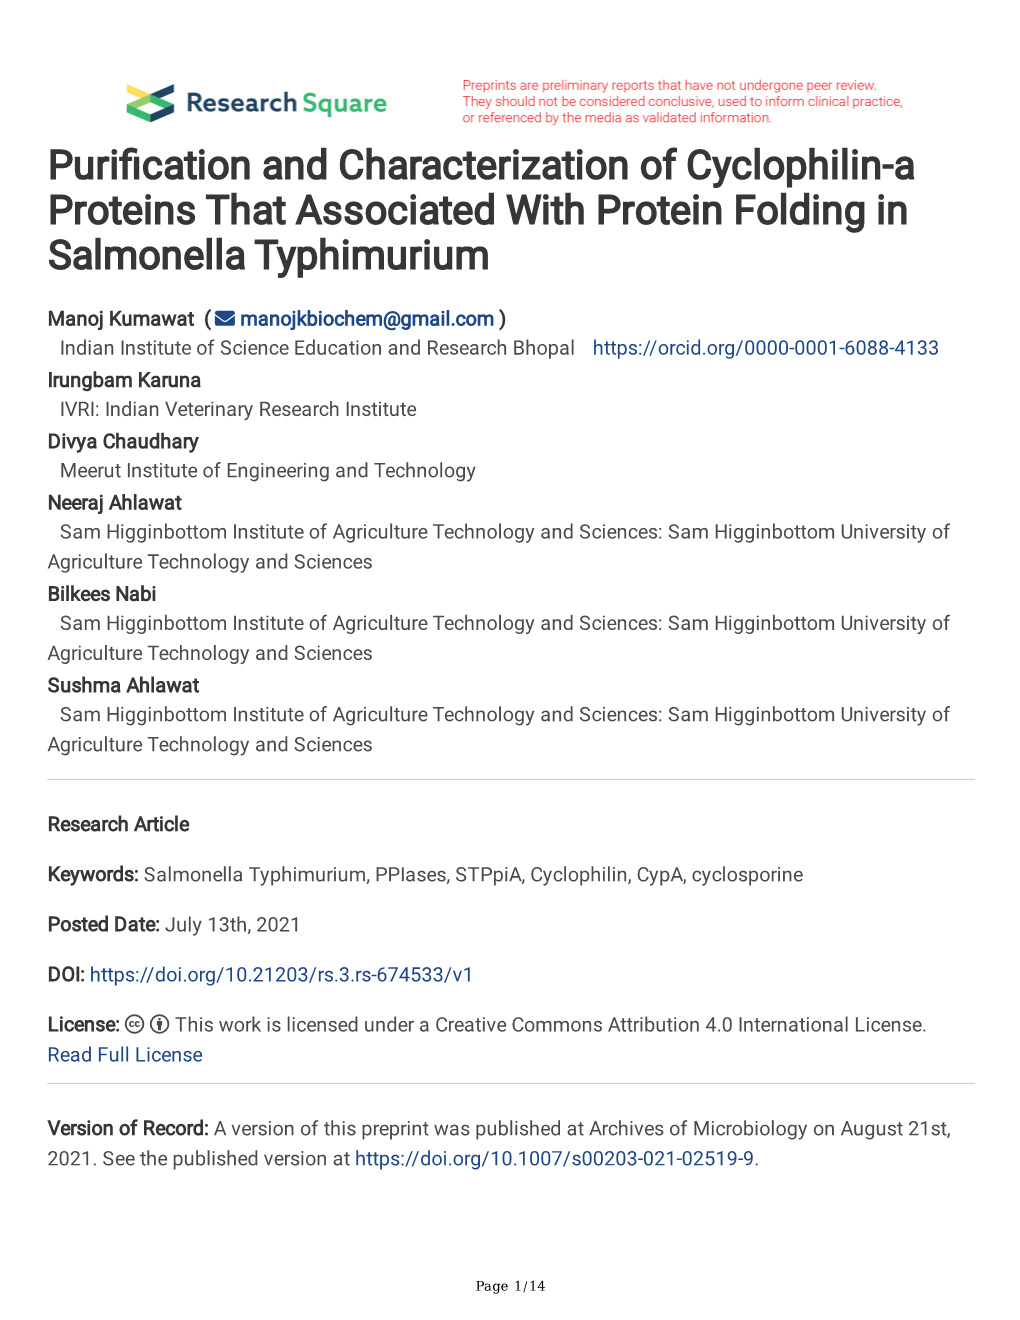 Puri Cation and Characterization of Cyclophilin-A Proteins That